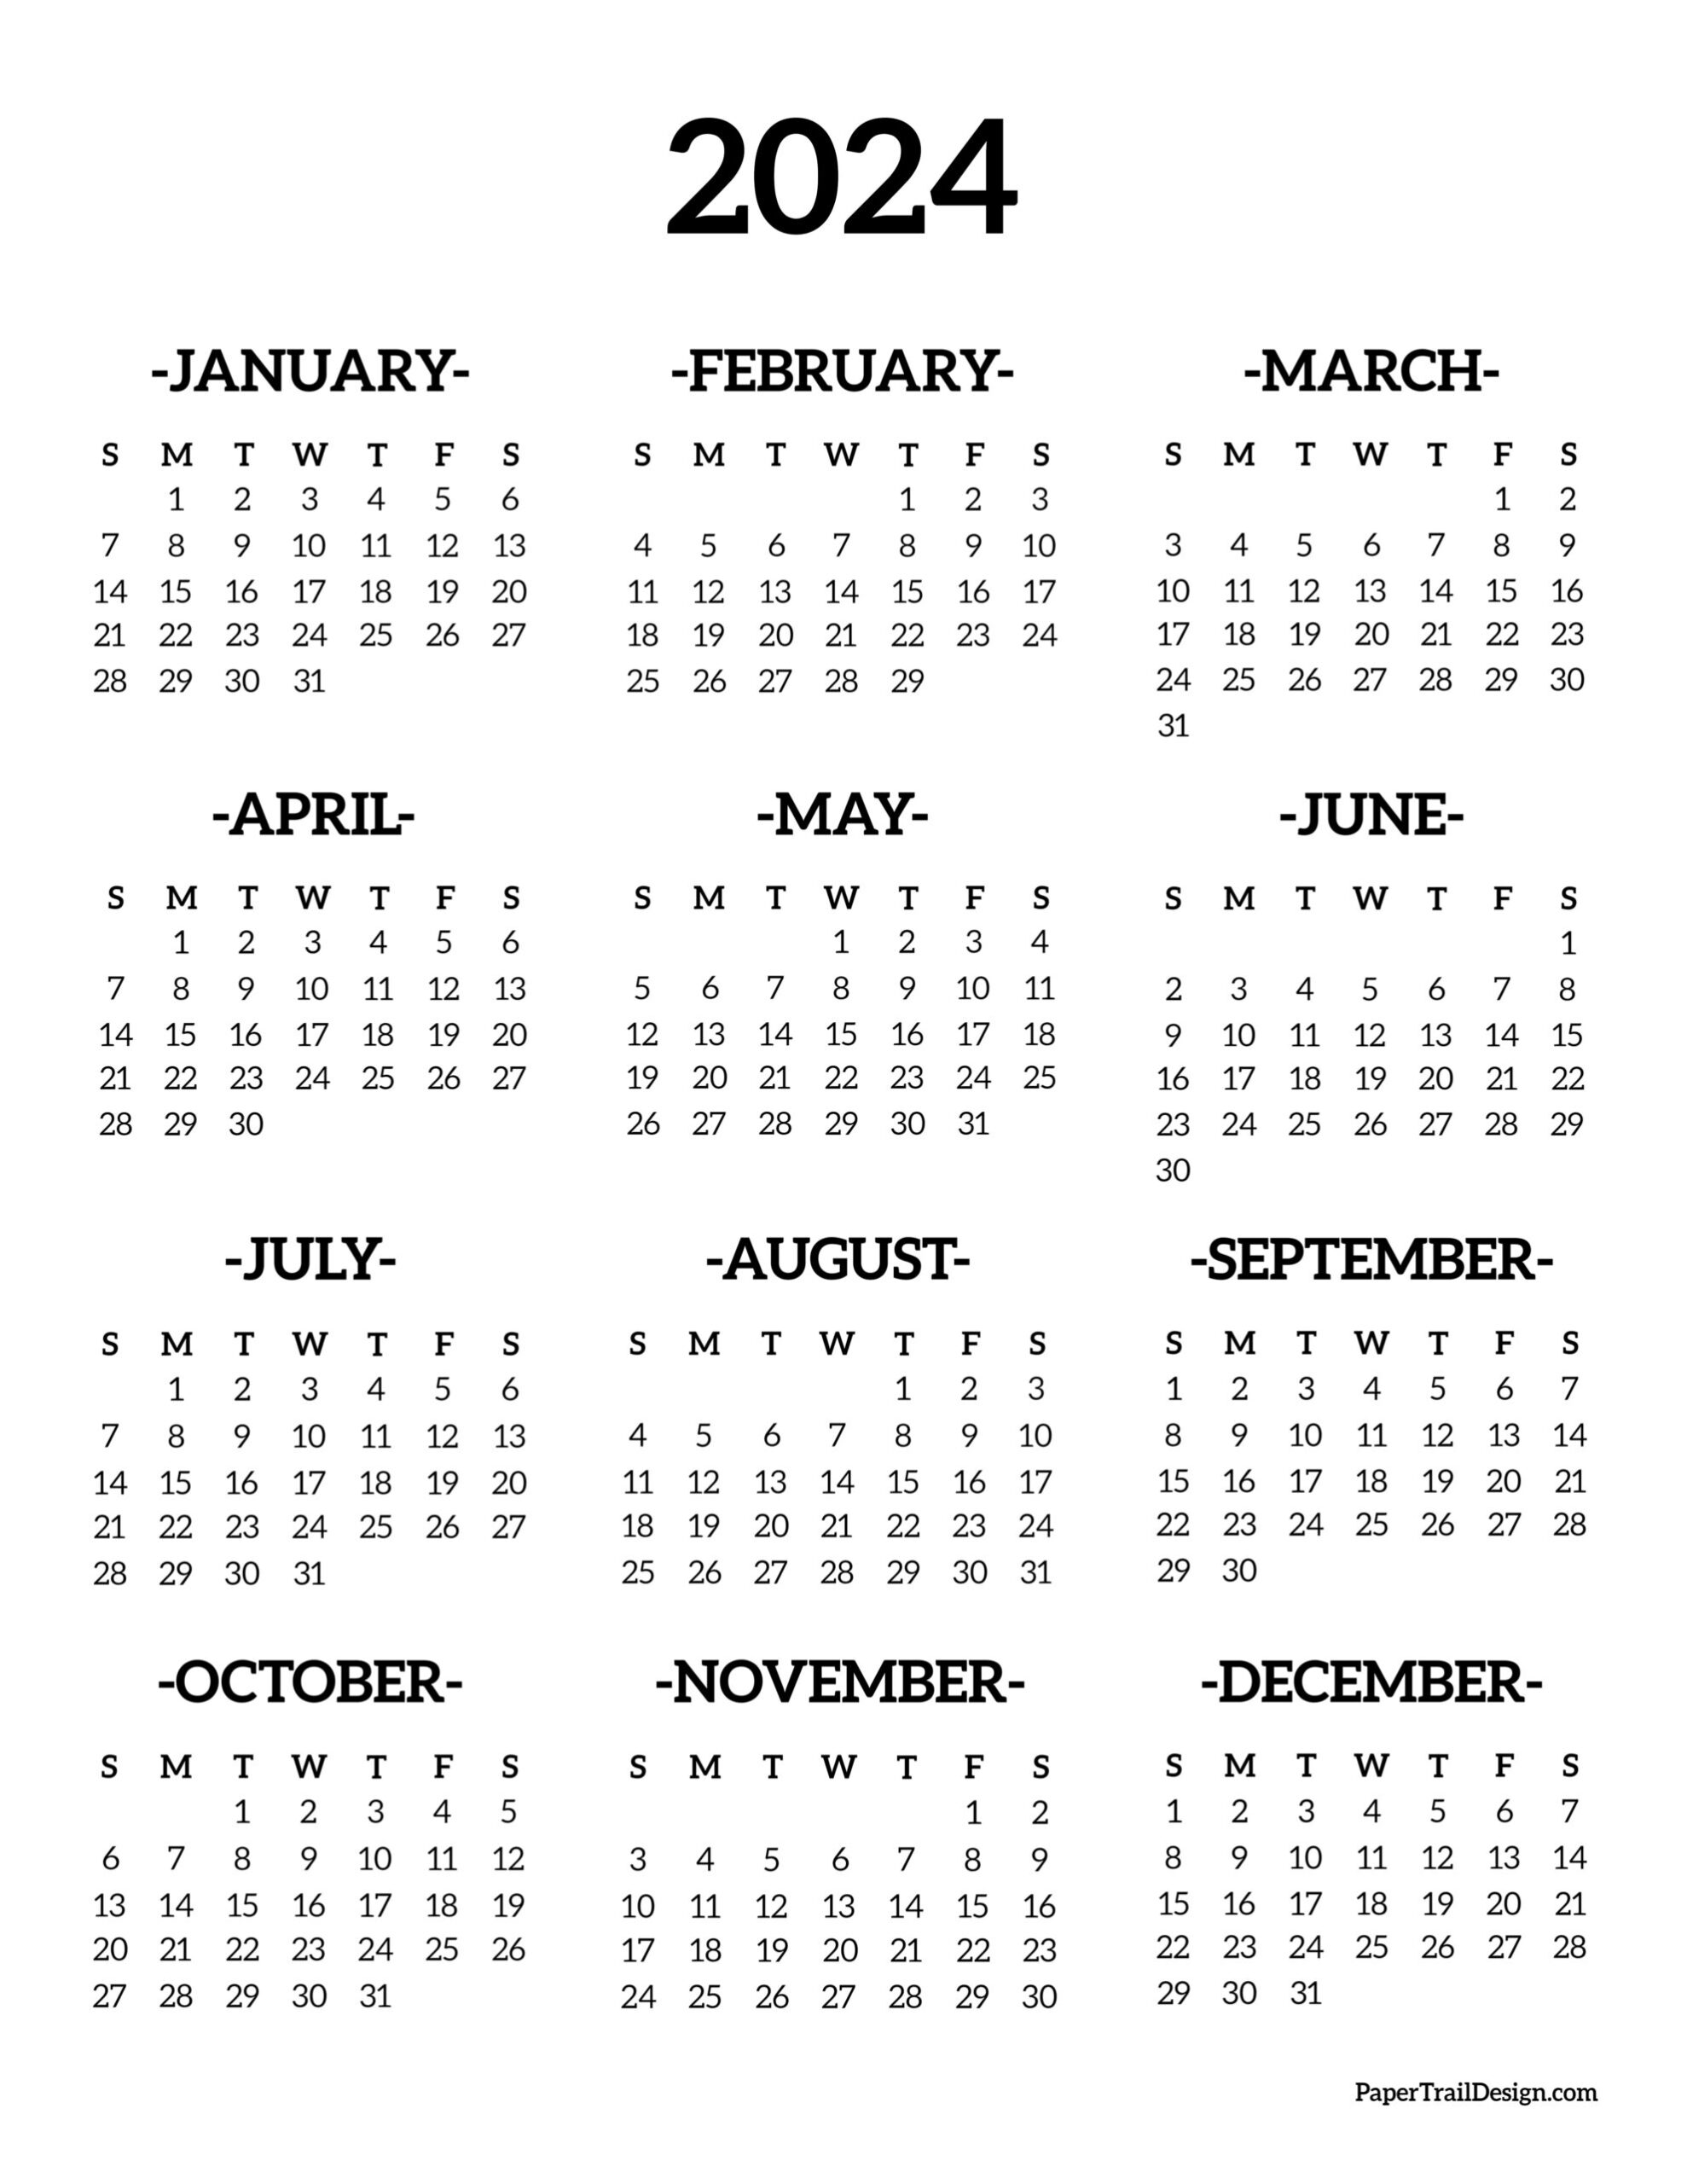 Calendar 2024 Printable One Page - Paper Trail Design for Printable Calendar Pages 2024 Free